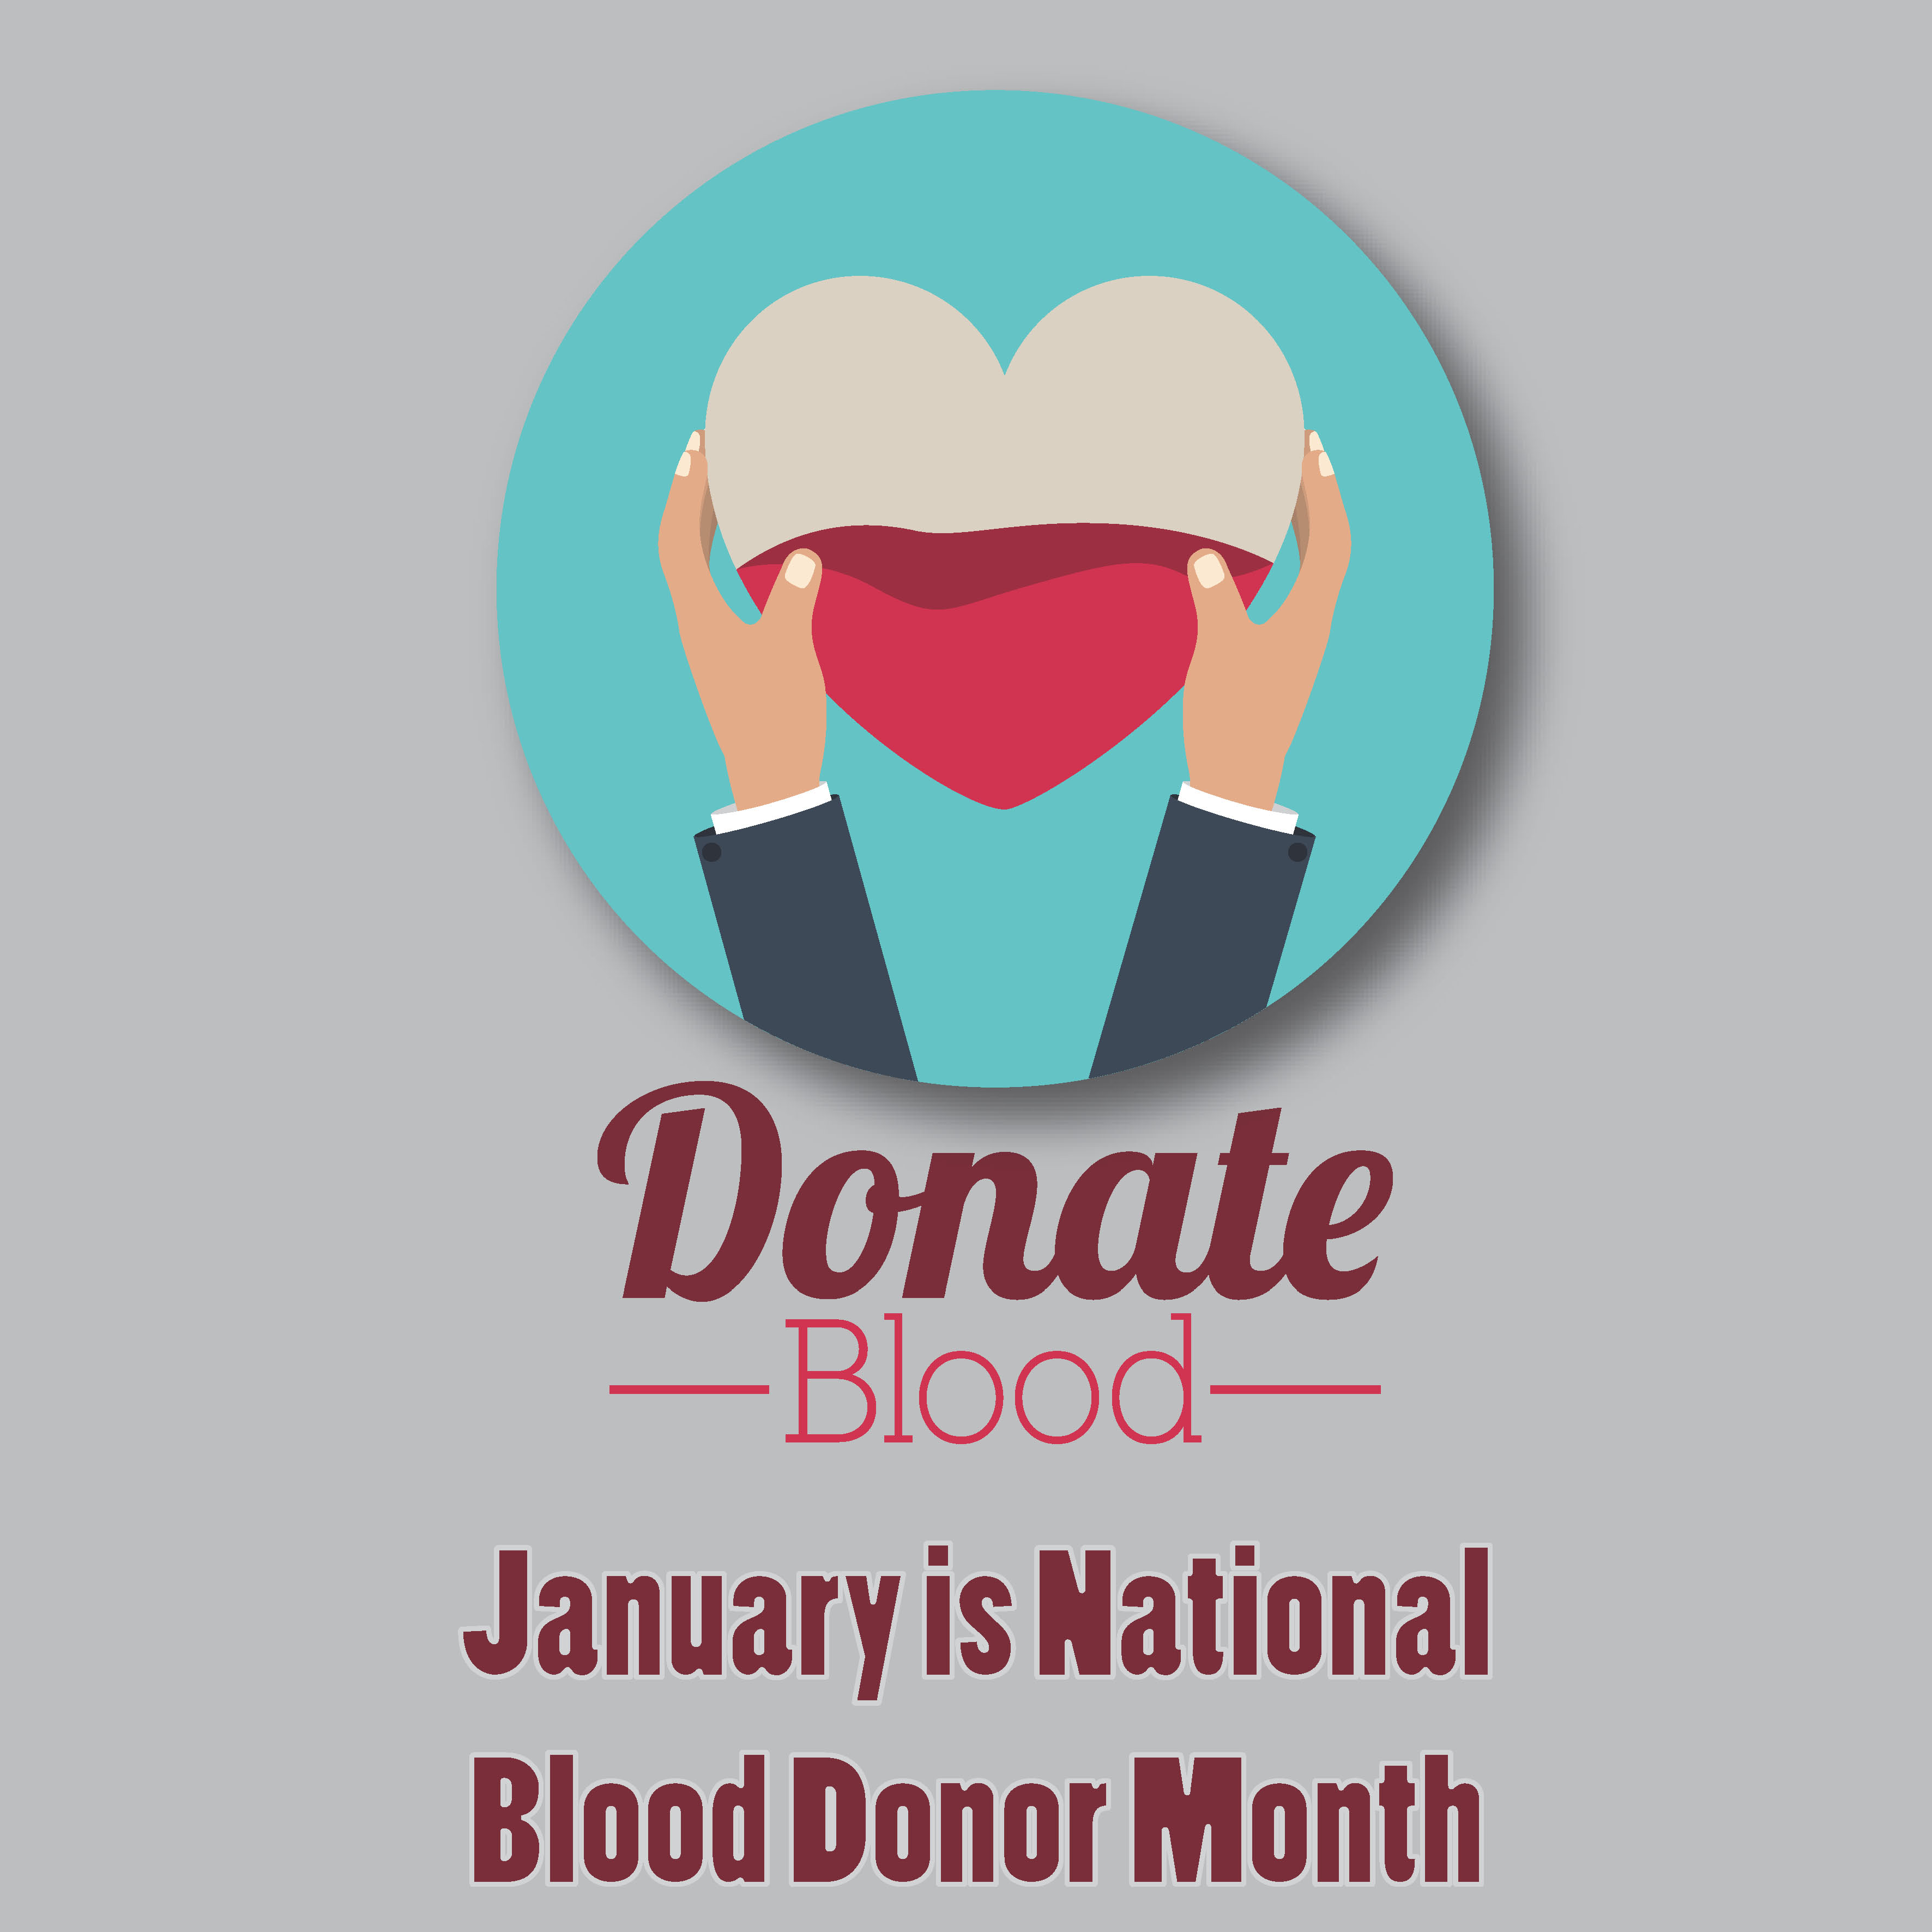 High Resolution Wallpaper | Blood Donor Month 3544x3544 px